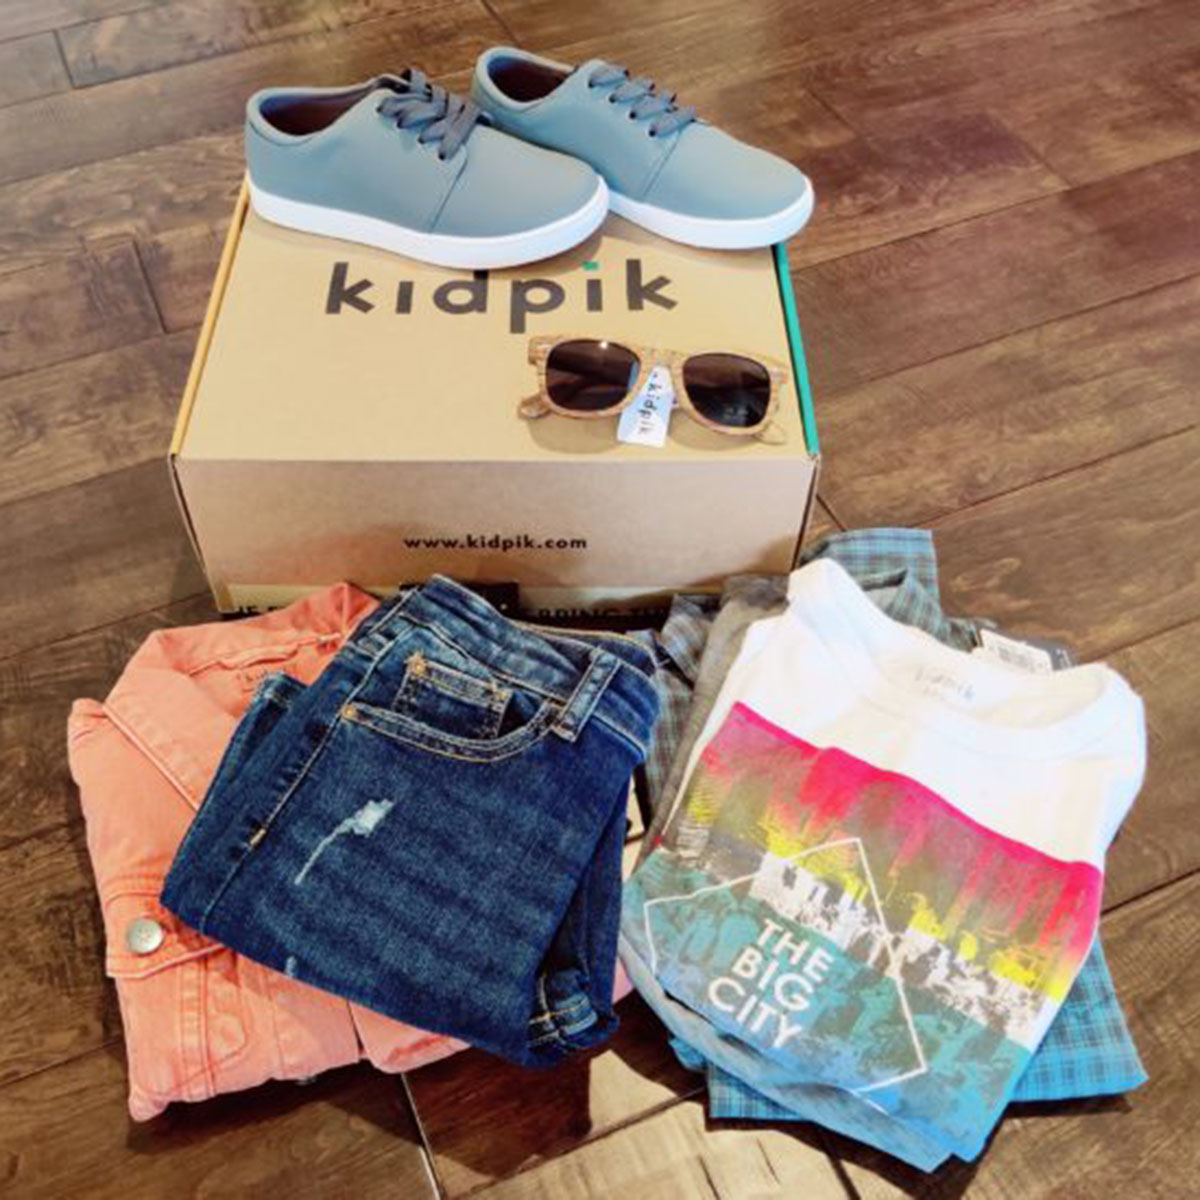 kidpik Review – The Kids Clothing Subscription Box That Will Up Their Style Game